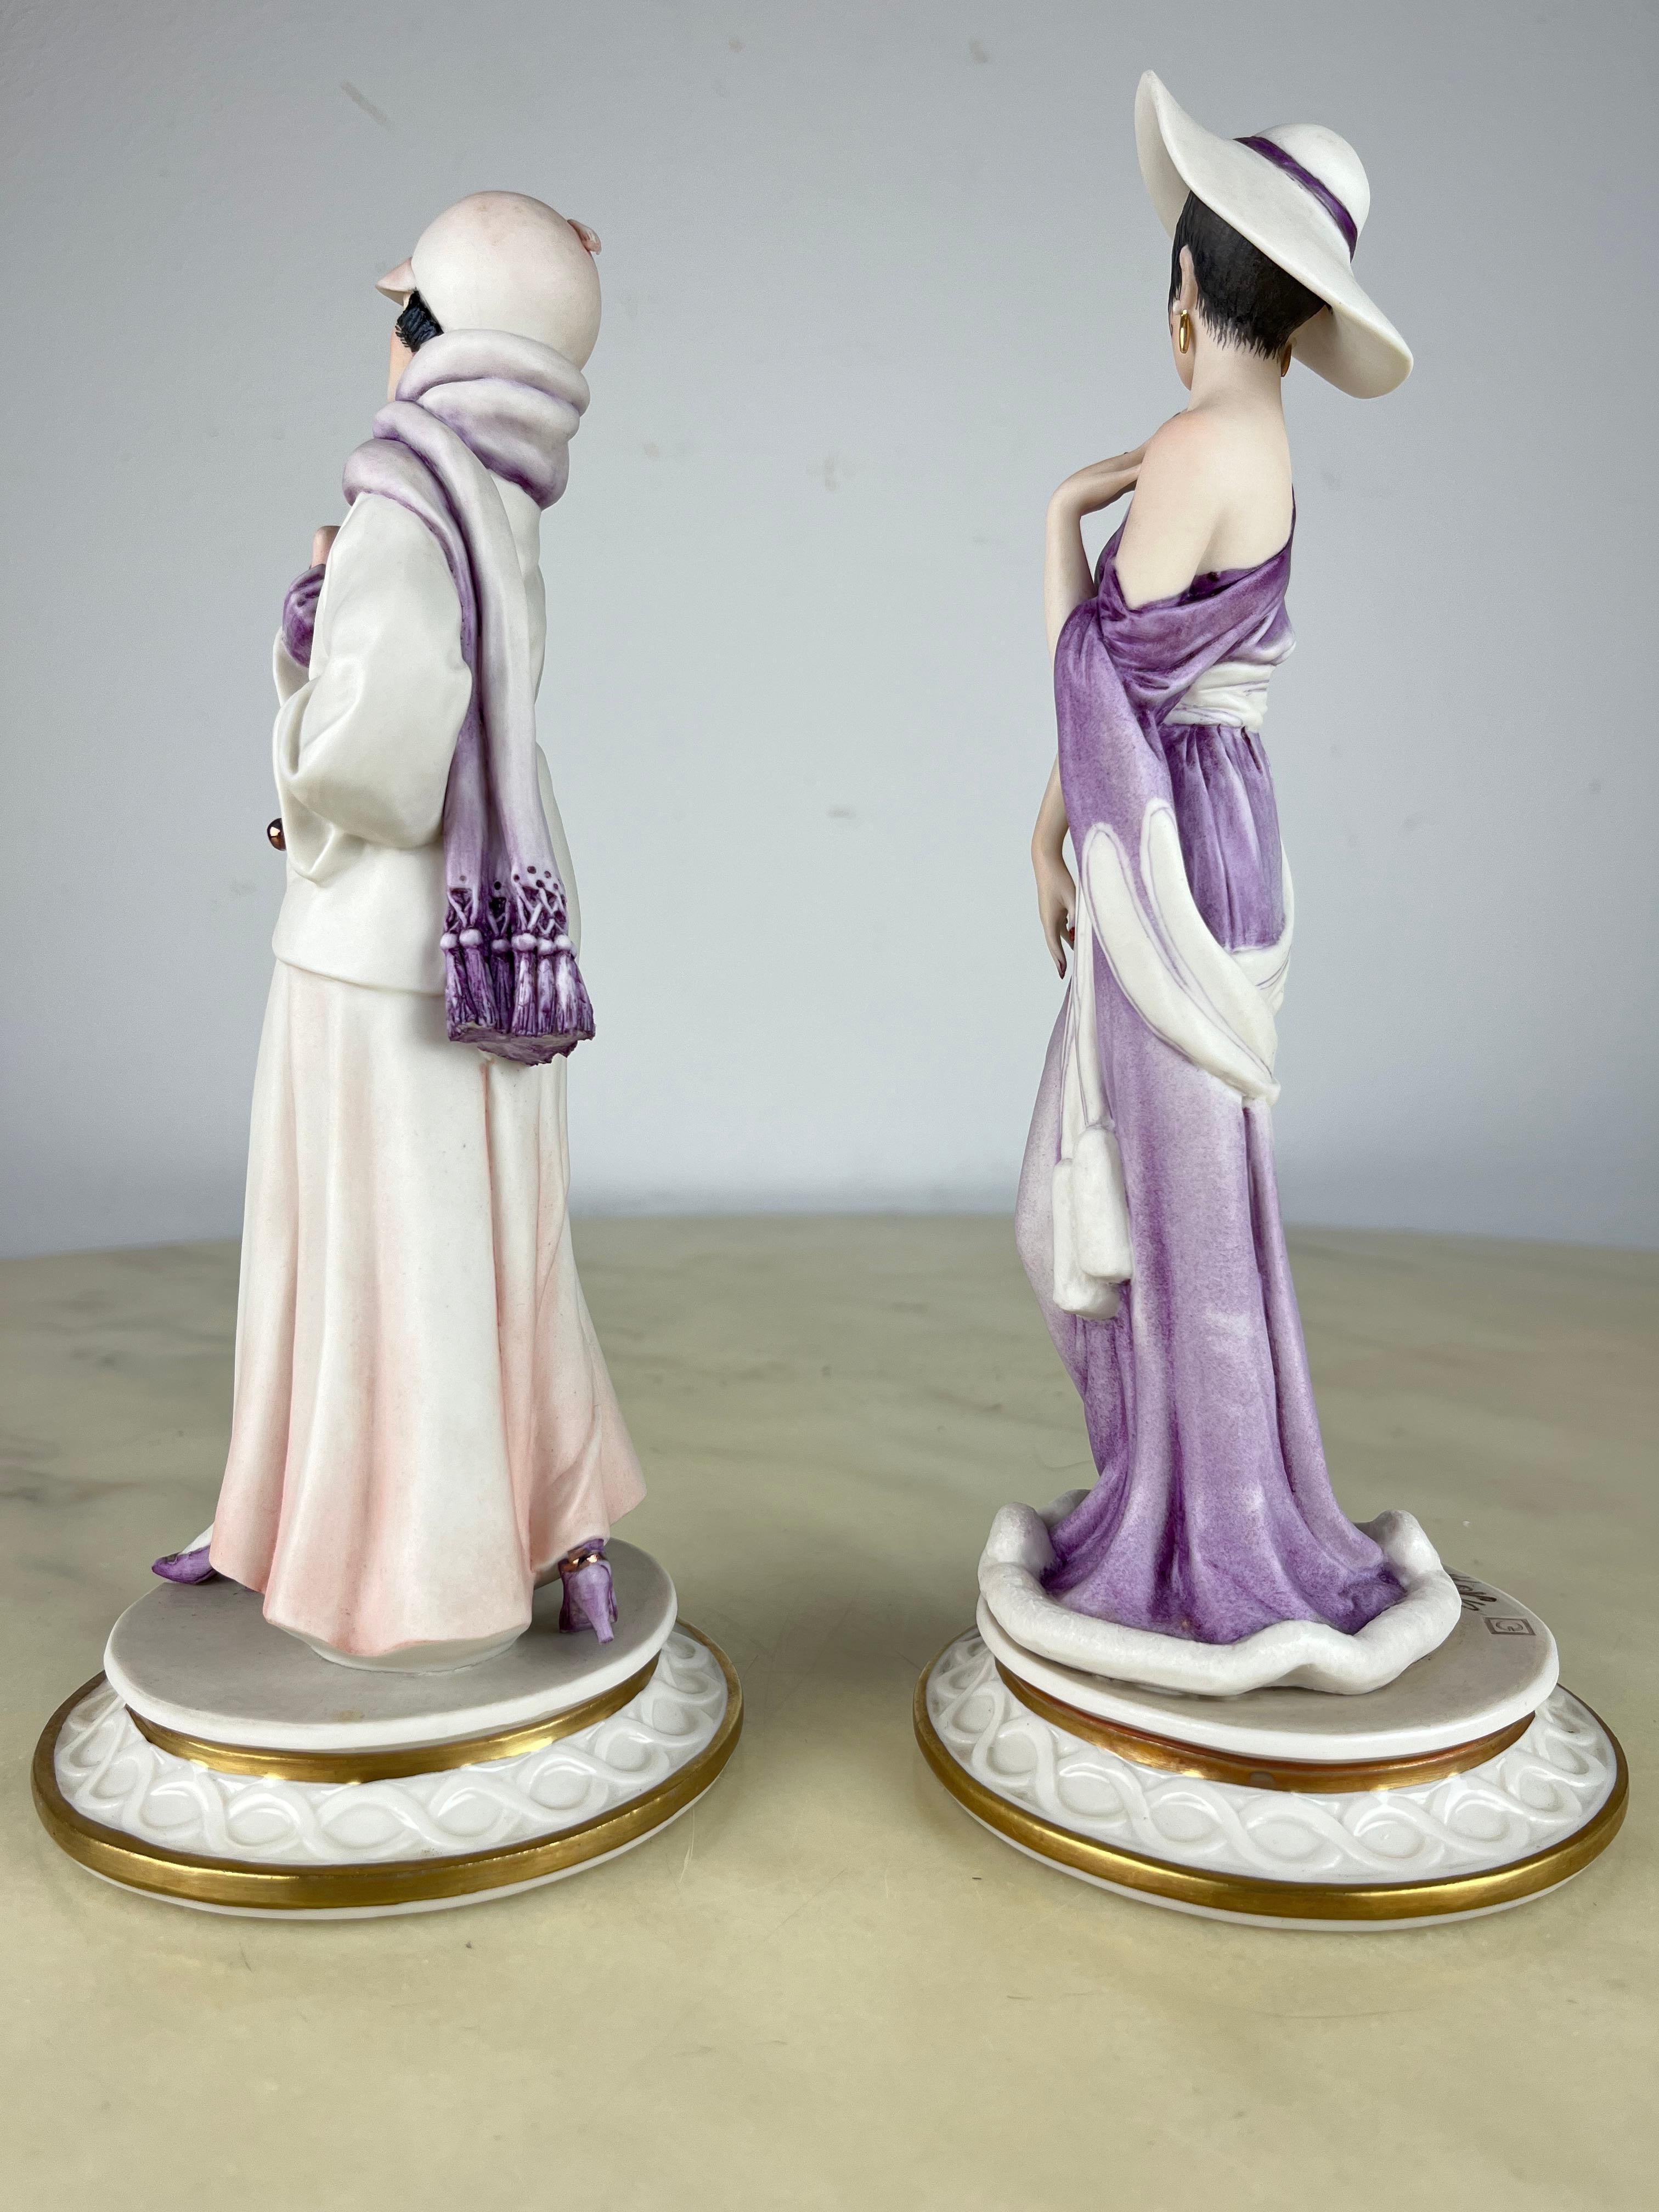 Set of 2 Capodimonte figurines by Sandro Maggioni, Italy, 1980s
One represents a model from 1913 and the other from 1930.
Intact and in excellent condition.
 His works denote a predisposition for attention to every detail and for a notable harmony